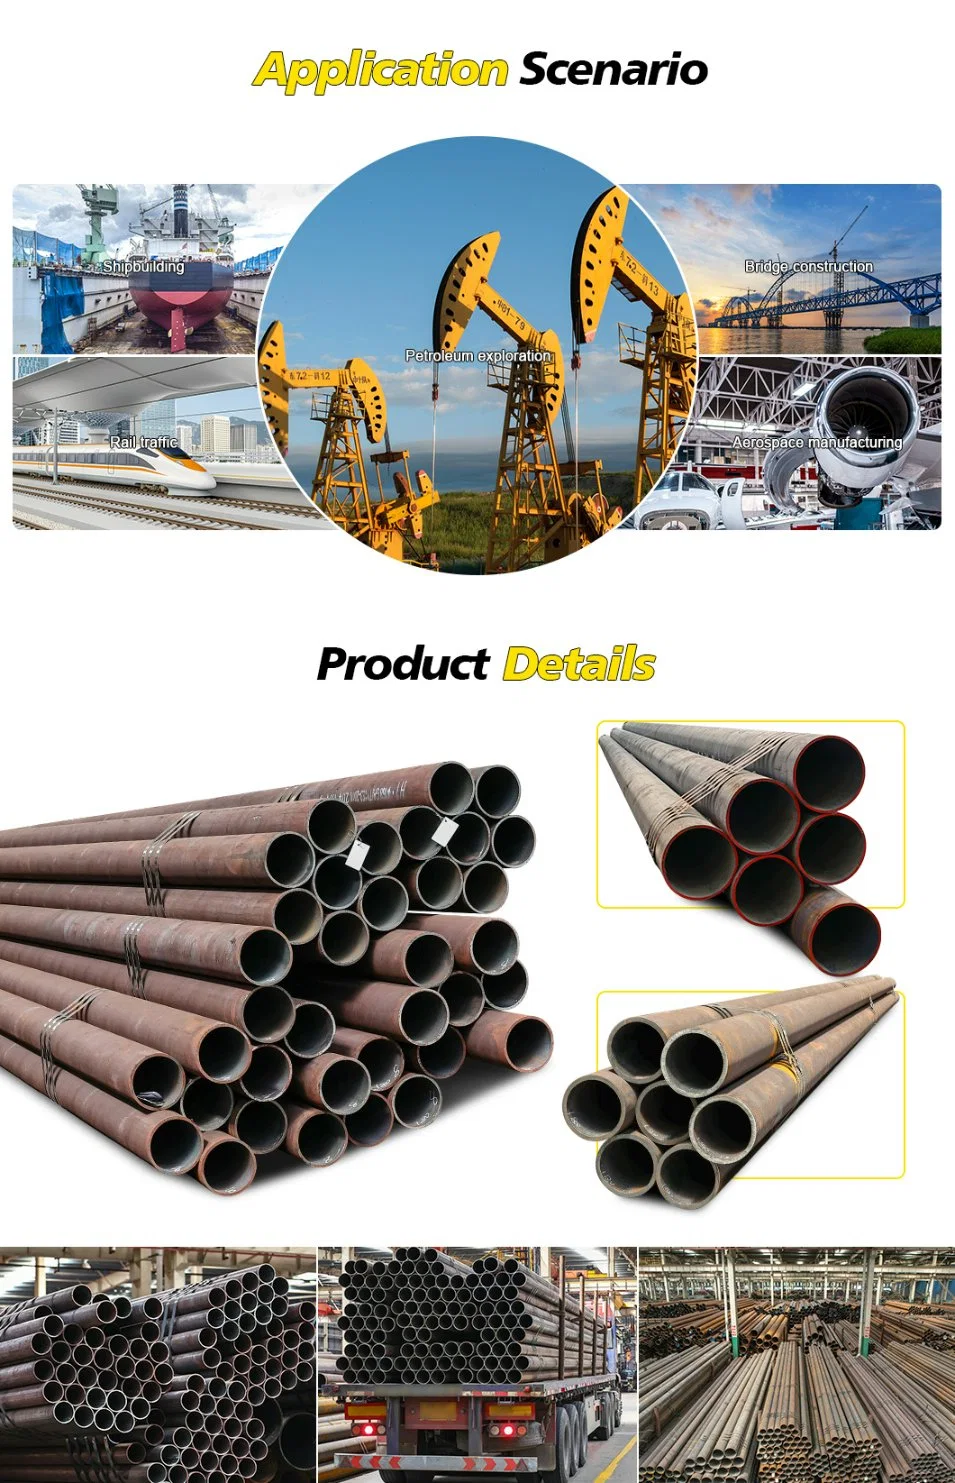 Carbon Steel Seamless Pipe ASTM A335 Steel Pipe Round Carbon Steel Tube ASTM A36 A53 A192 Q235 Q235B 1045 4130 Sch40 10mm 60mm